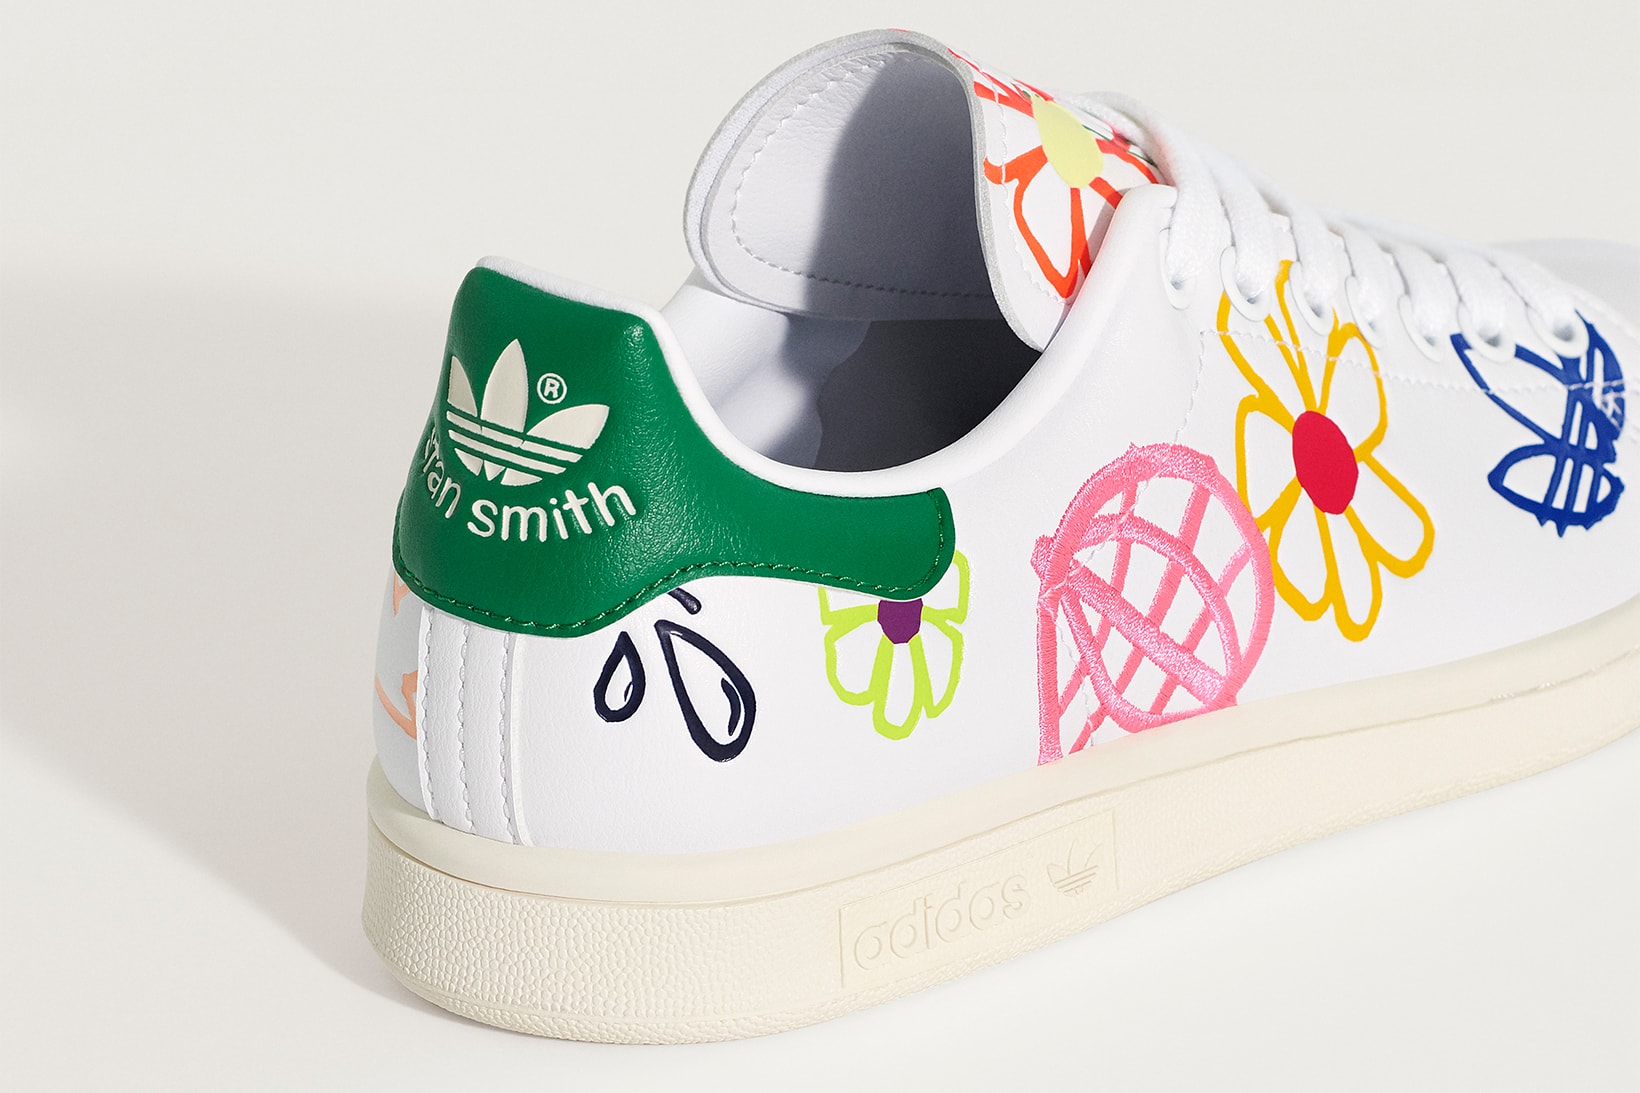 adidas originals stan smith primegreen sustainable sneakers white colorway footwear shoes sneakerhead